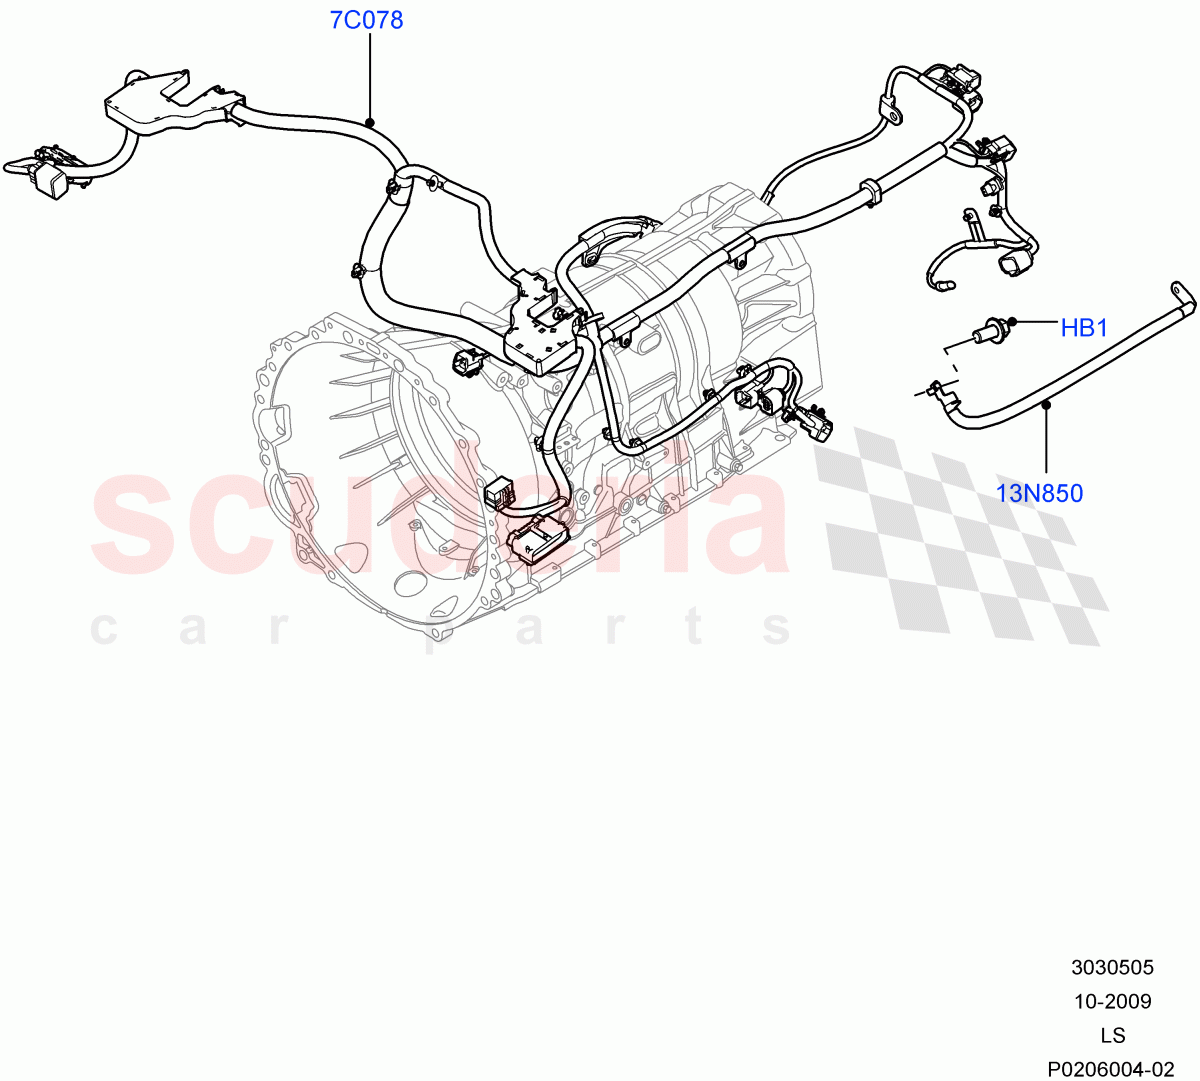 Electrical Wiring - Engine And Dash(Case Assy / Transmission)((V)FROMAA000001) of Land Rover Land Rover Discovery 4 (2010-2016) [5.0 OHC SGDI NA V8 Petrol]